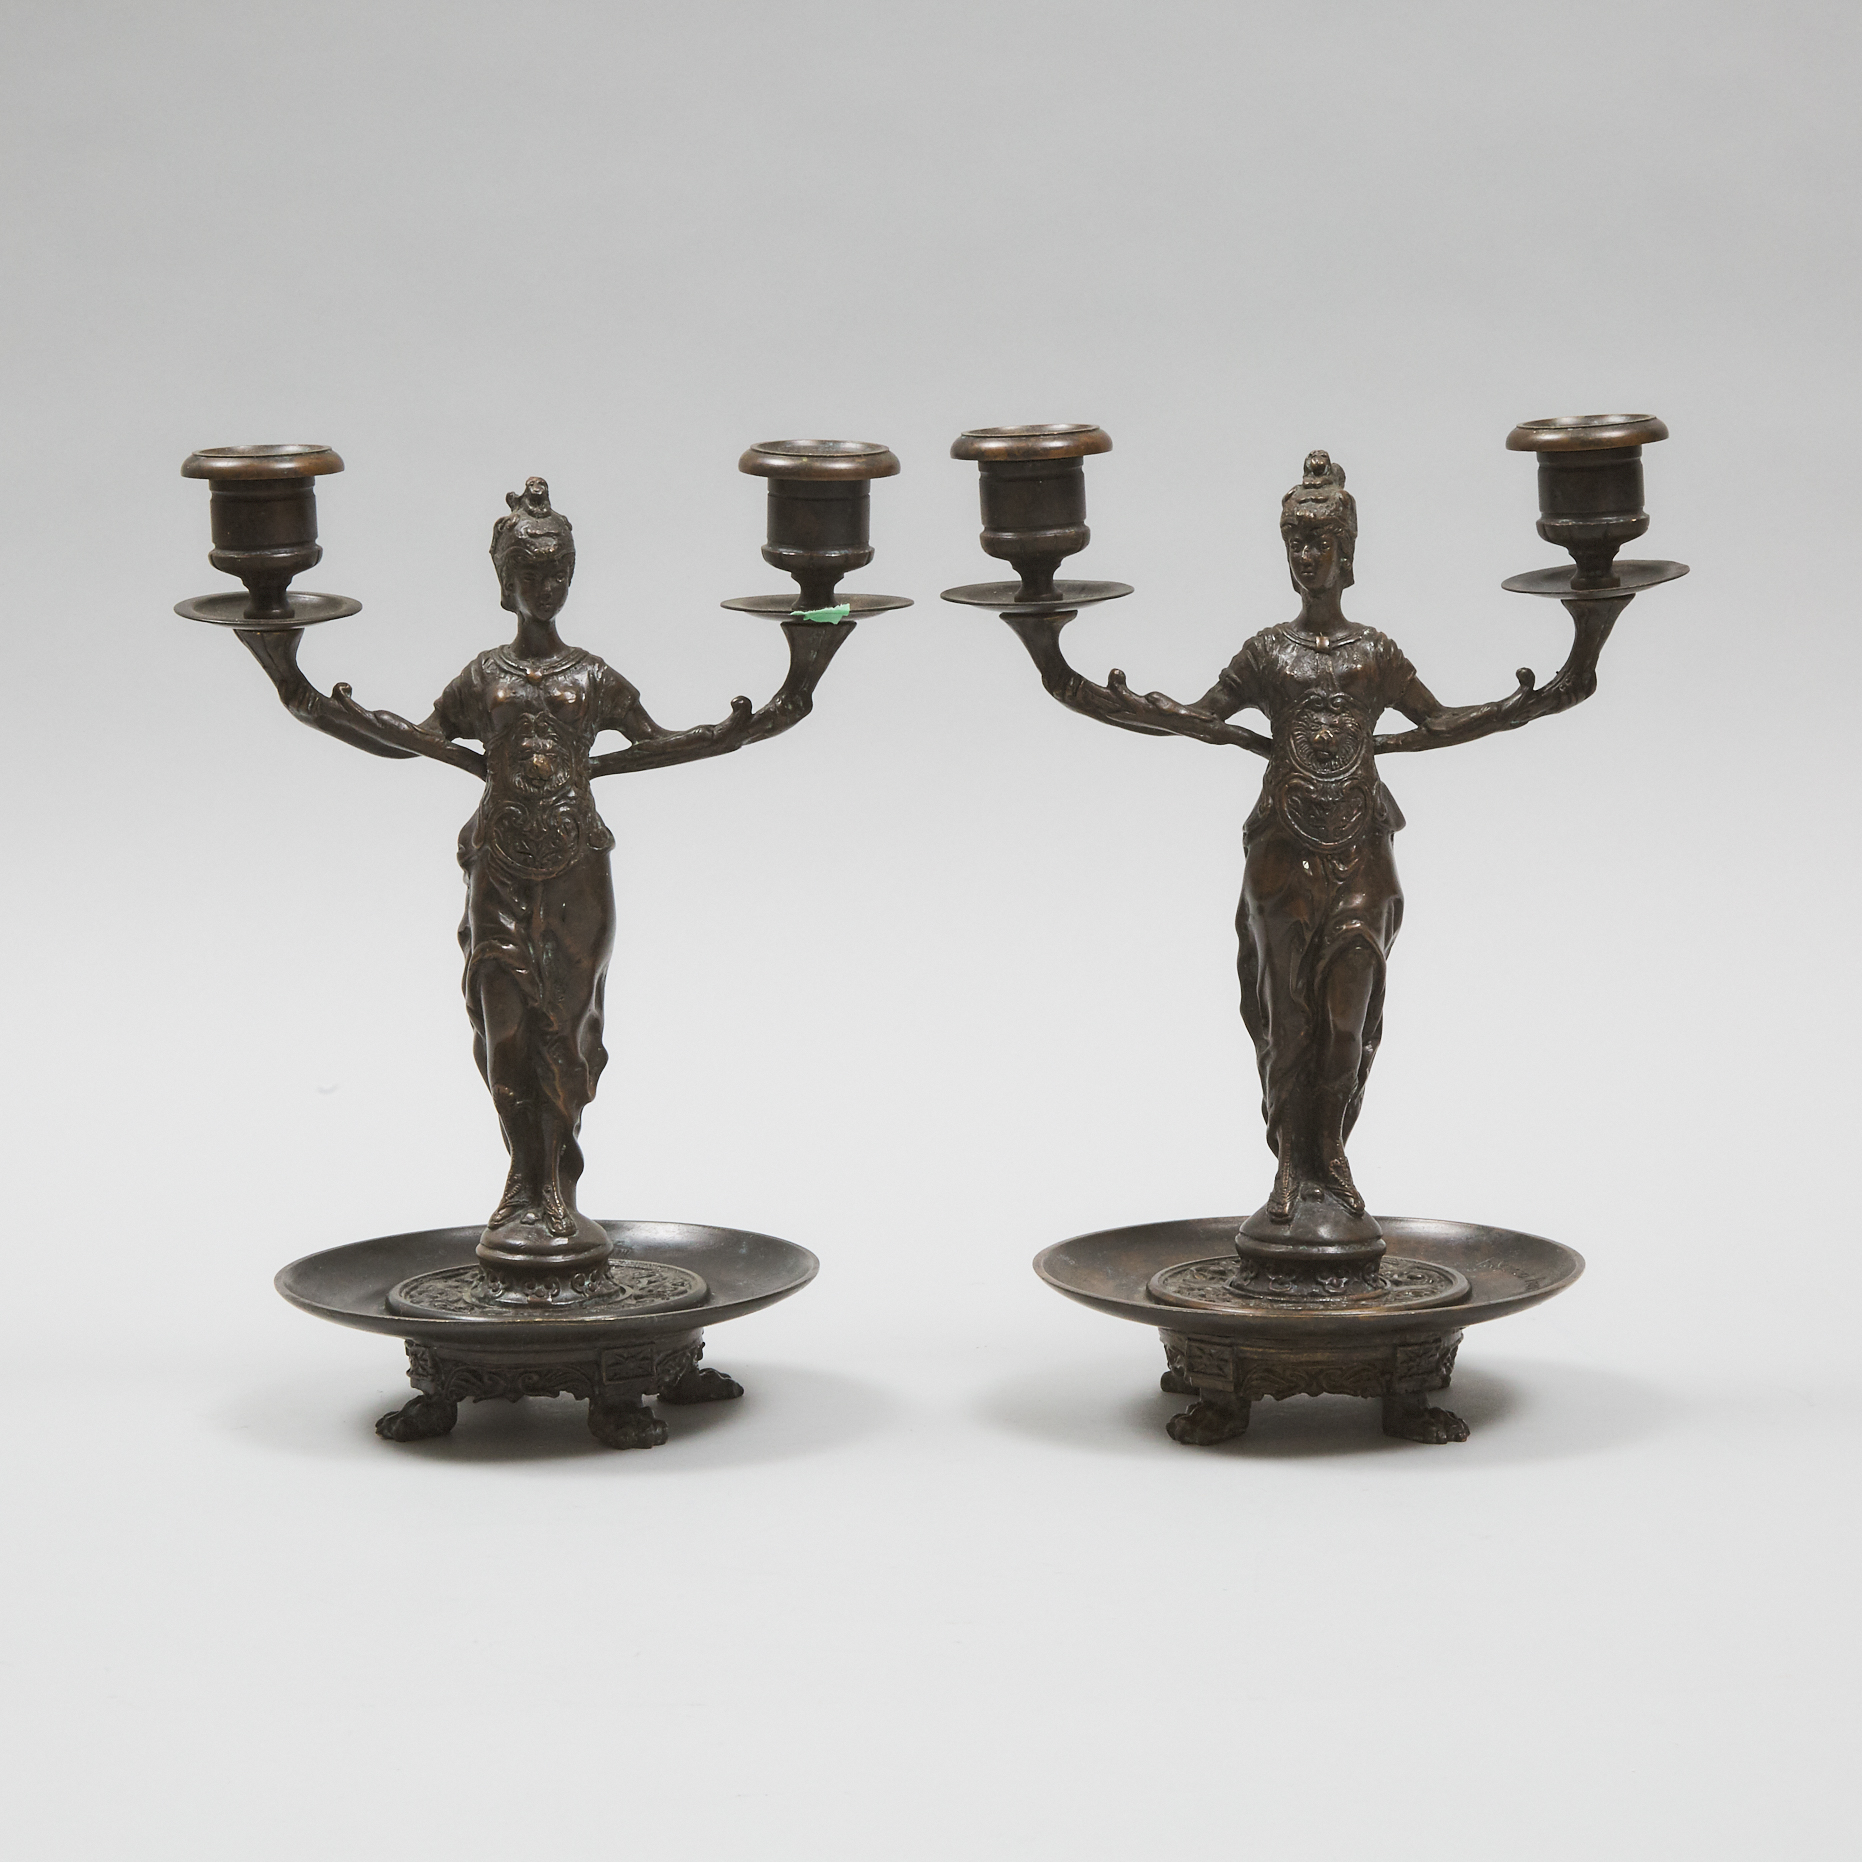 Pair of French Neo Grec Patinated Bronze Candleabra signed F. Souchal, Paris, late 19th century